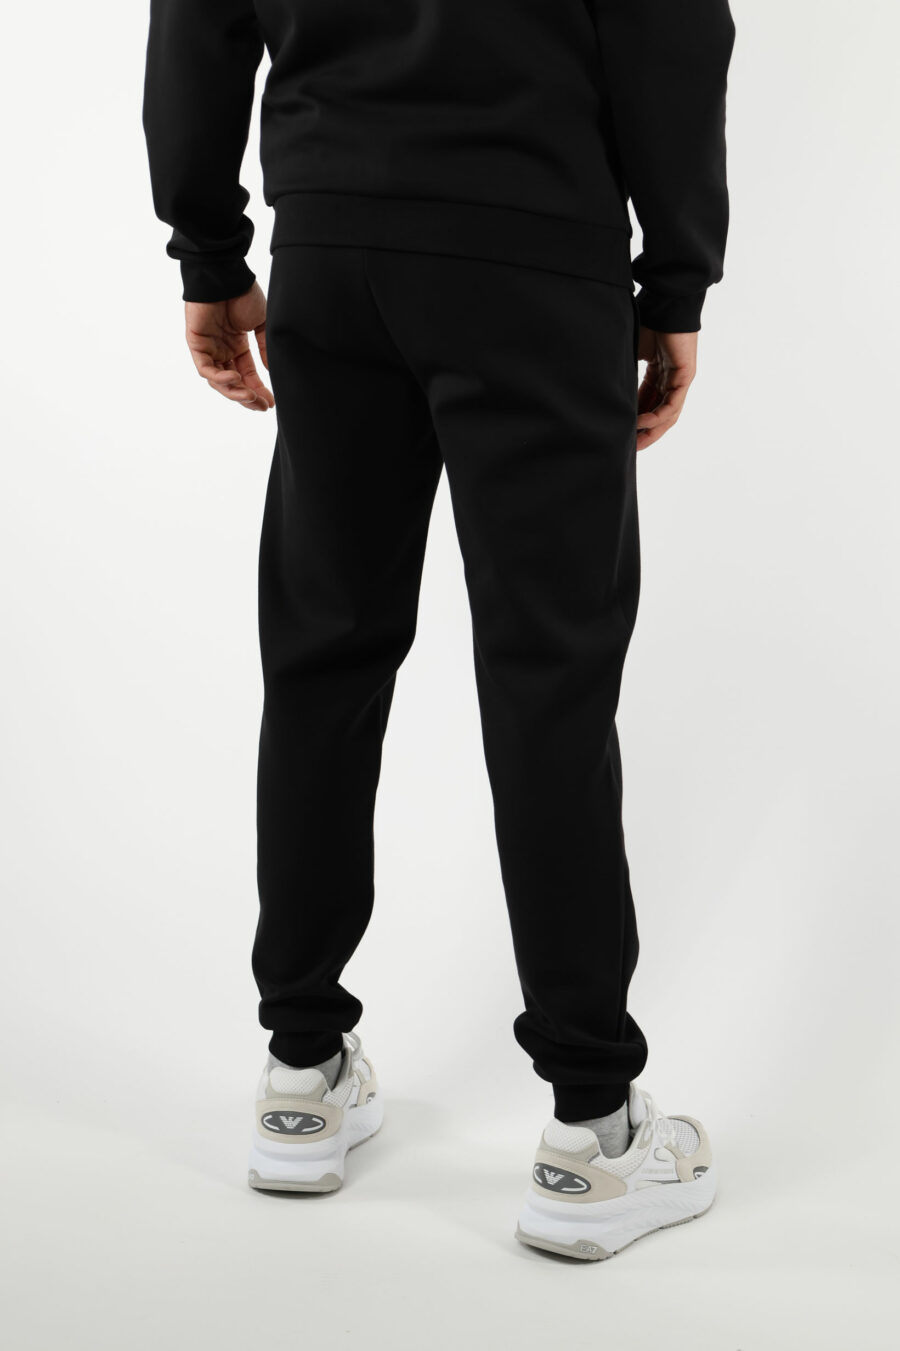 Tracksuit bottoms black with white "lux identity" minilogue on black plate - 110944